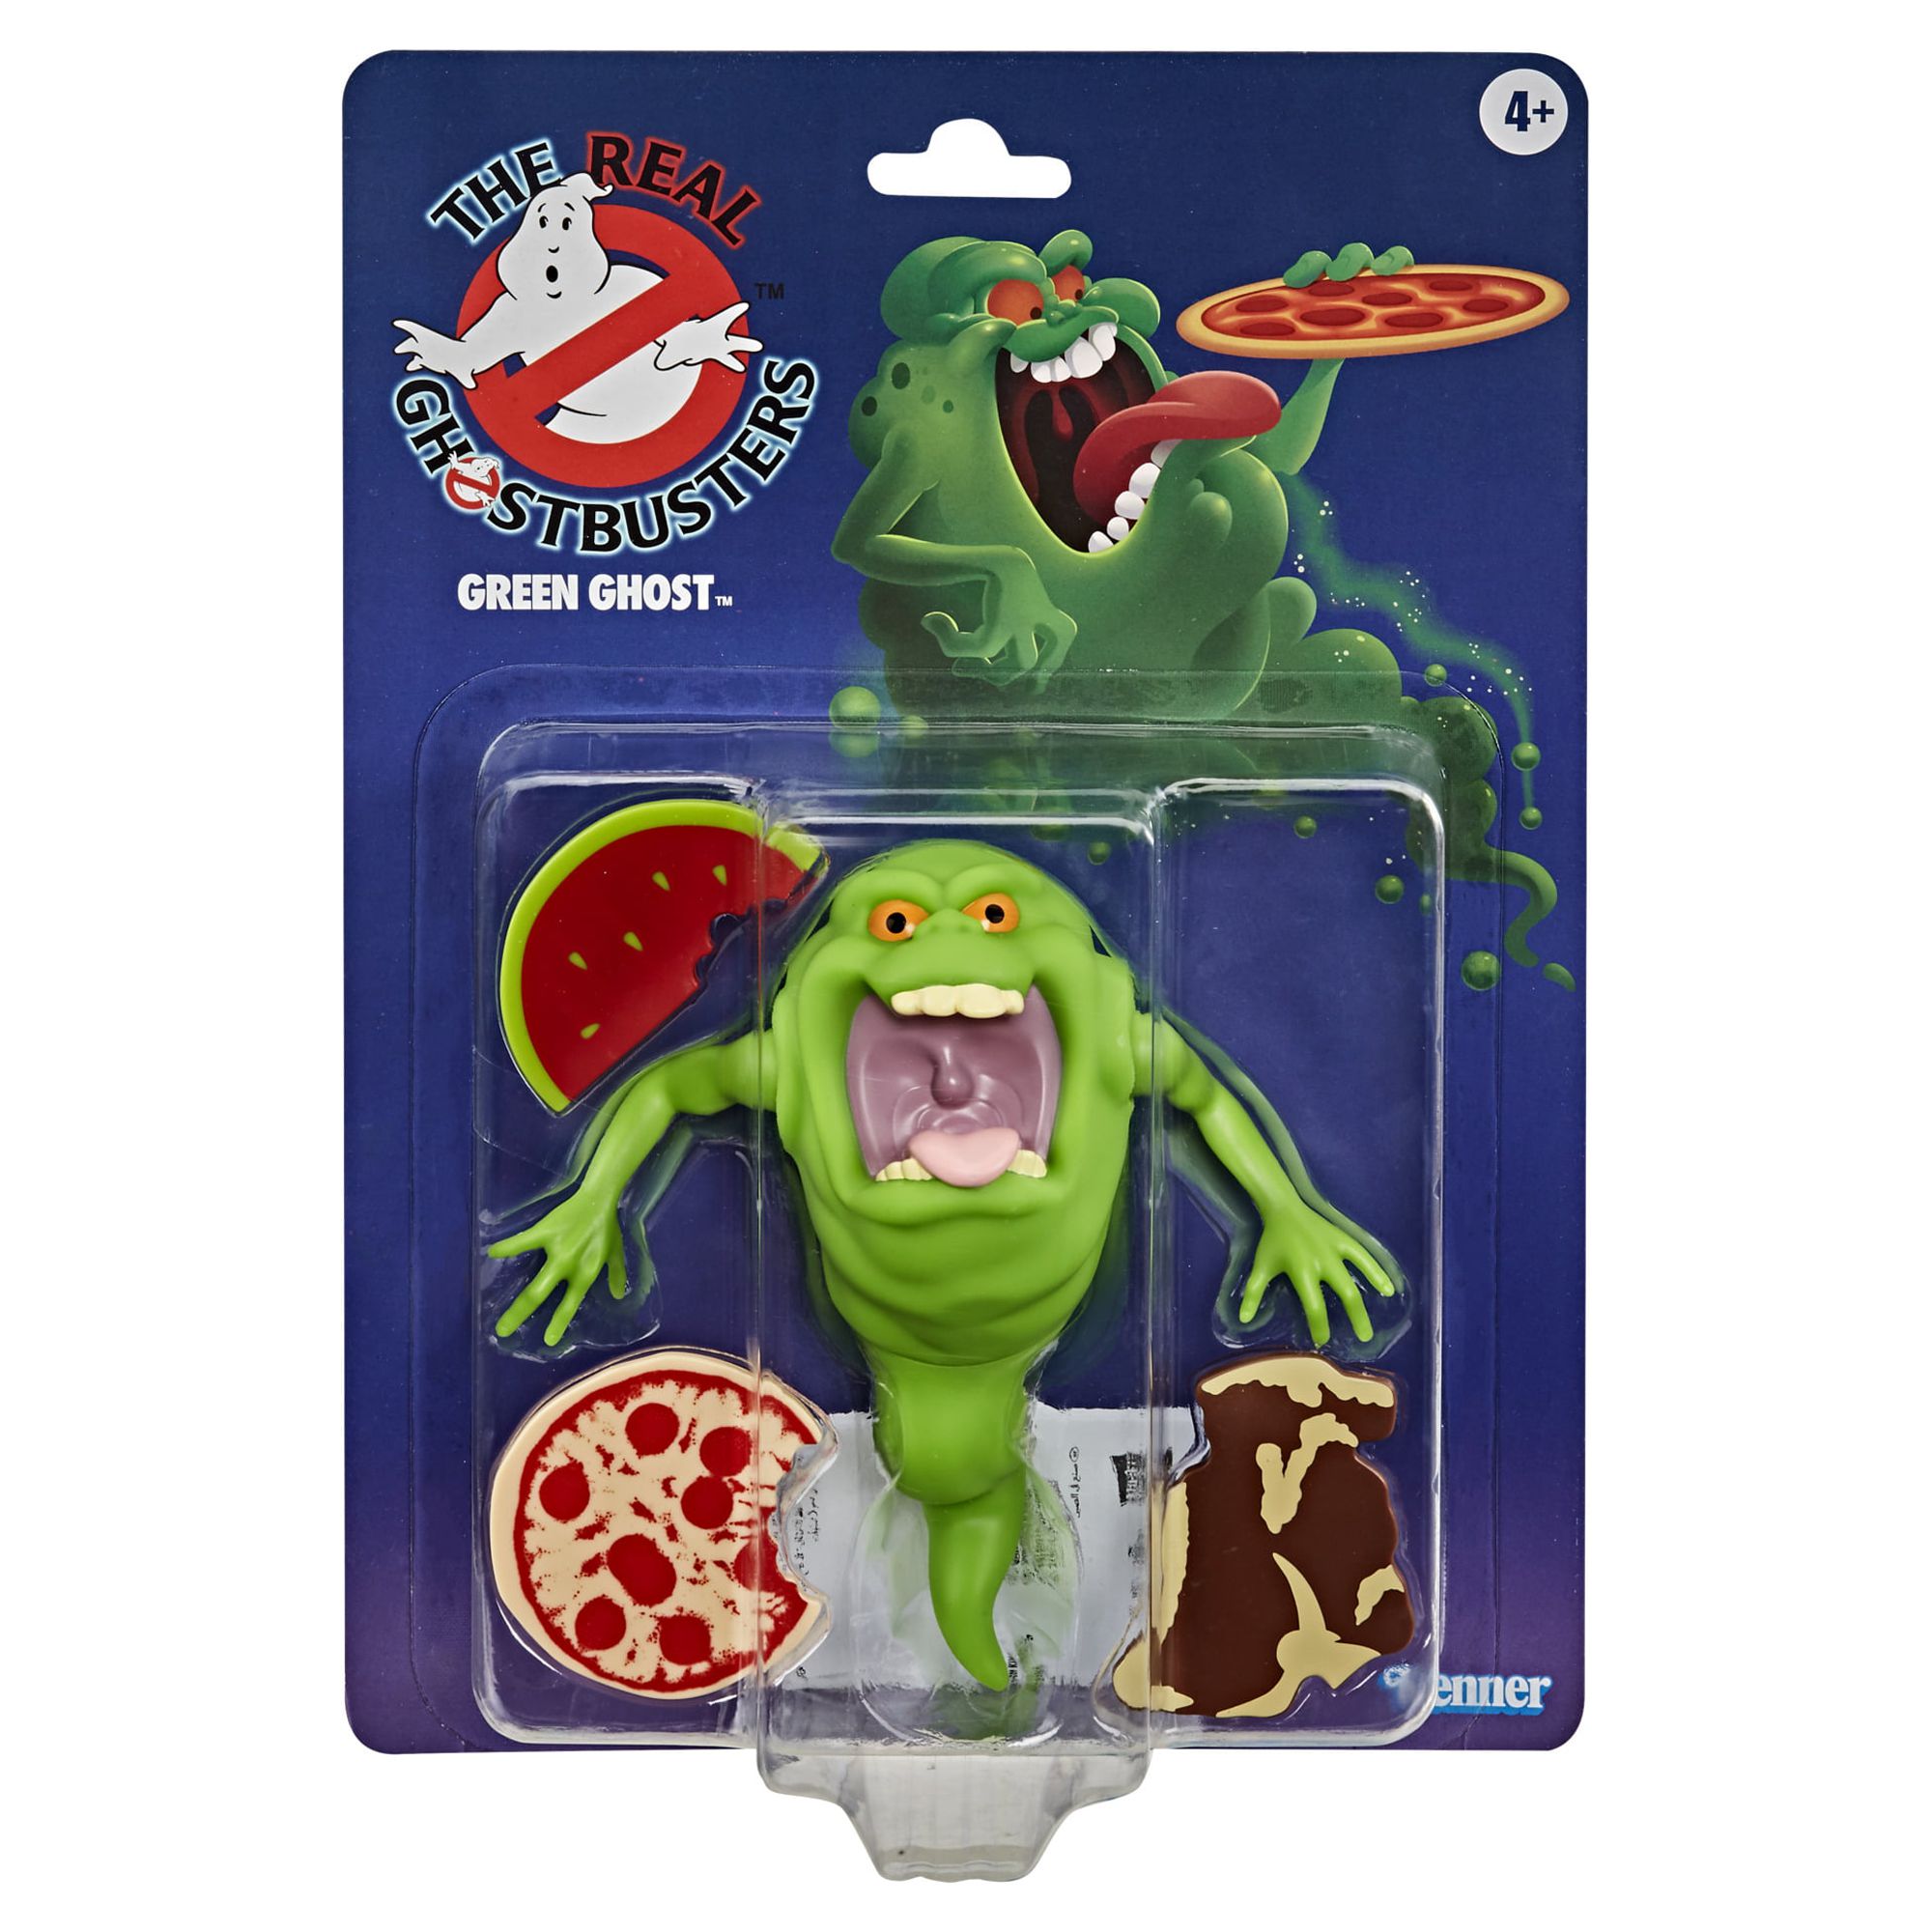 Ghostbusters Kenner Classics Green Ghost Slimer Retro Action Figure - image 5 of 5